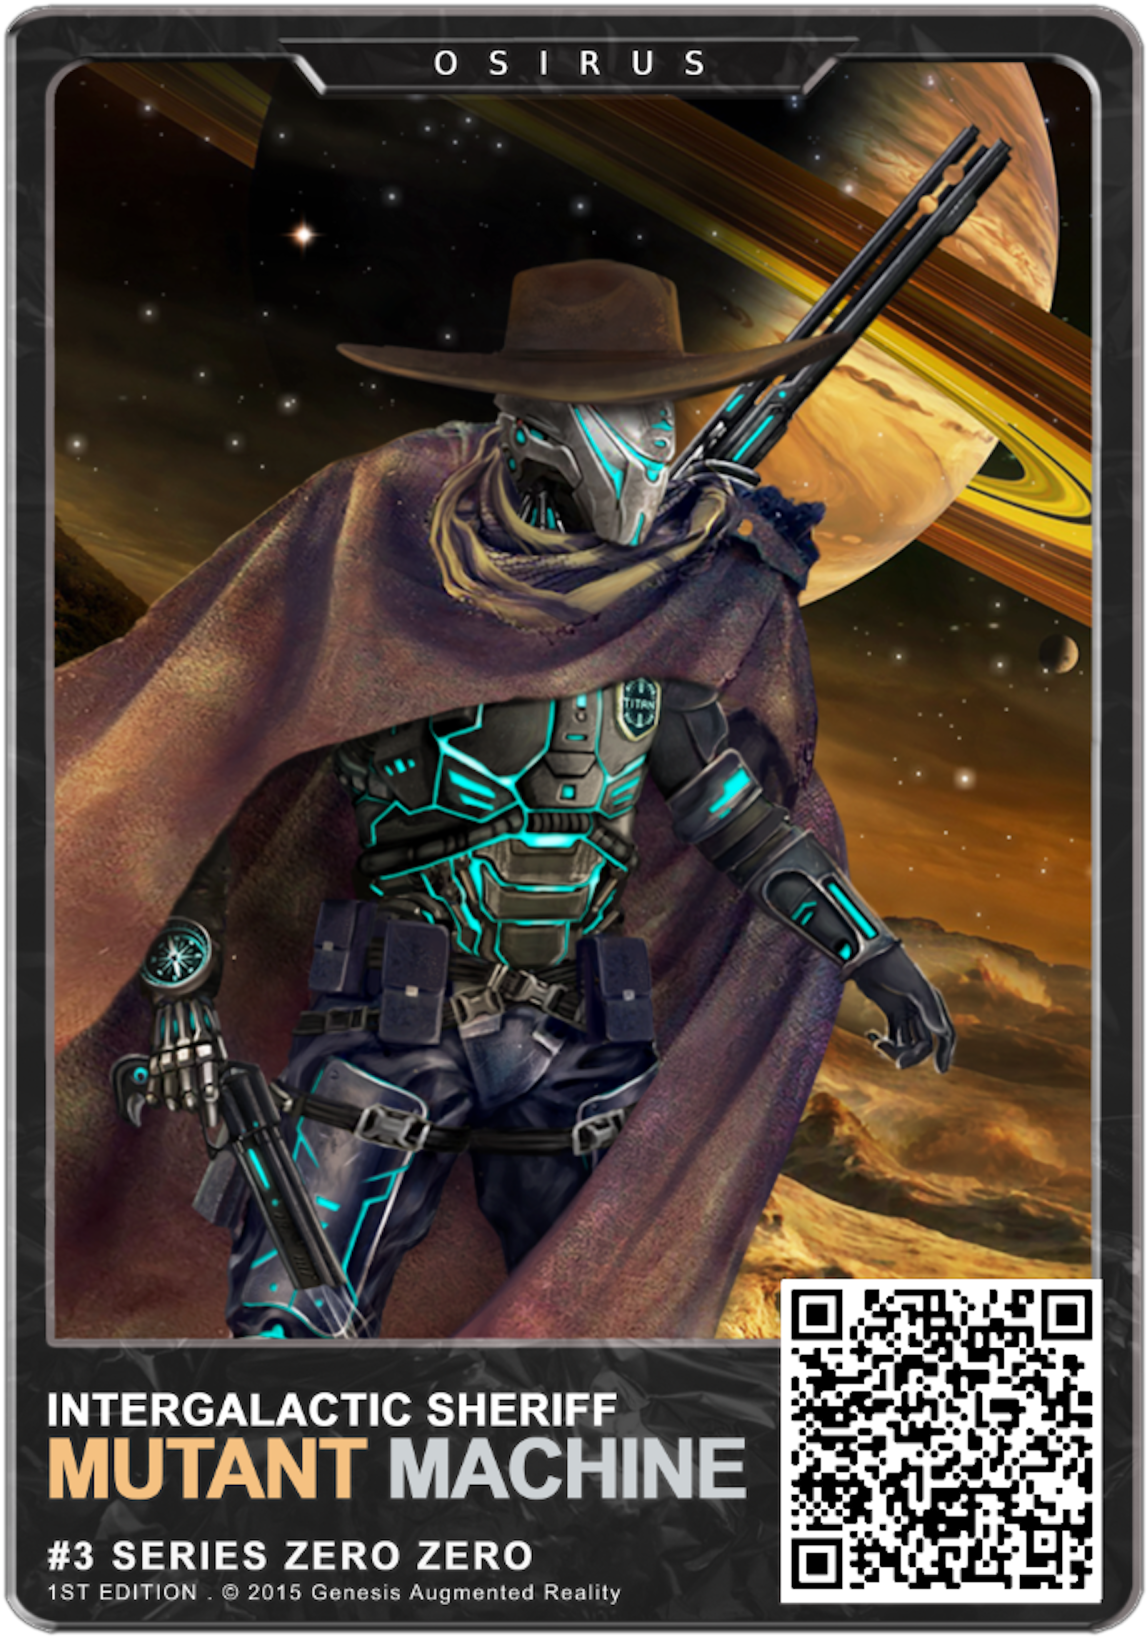 The Osirus trading card from the Genesis AR TCG (Augmented Reality Trading Card Game)